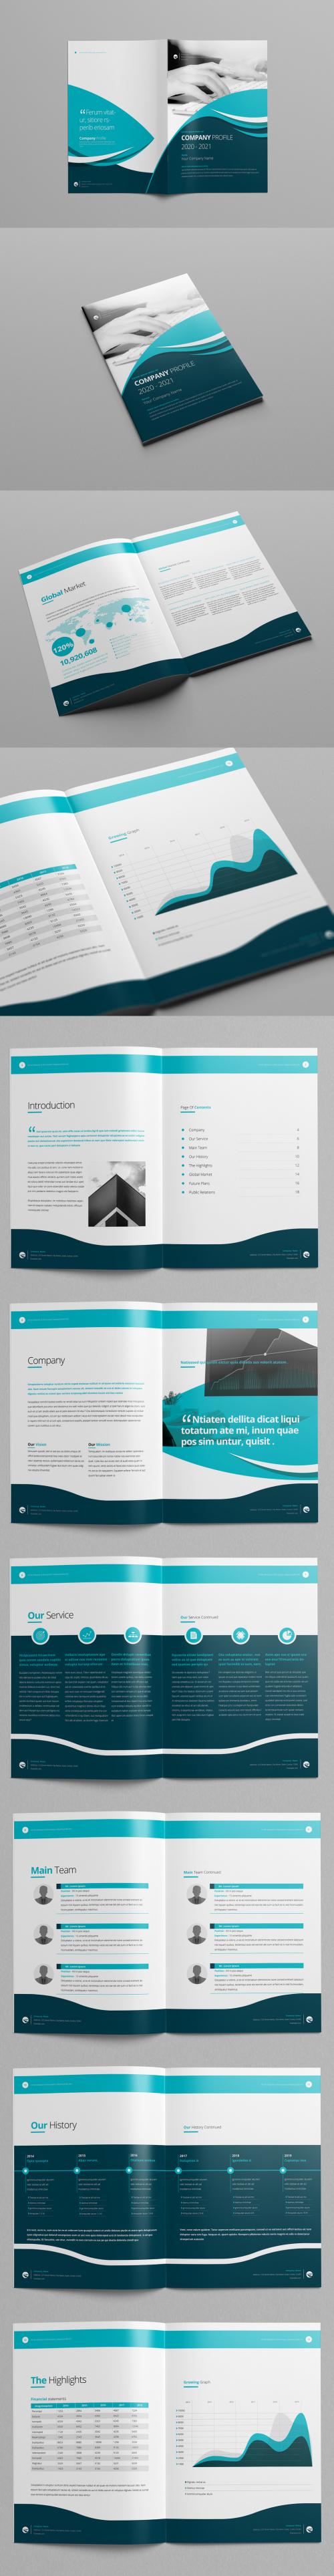 Company Profile Layout with Teal and Blue Accents - 220149458